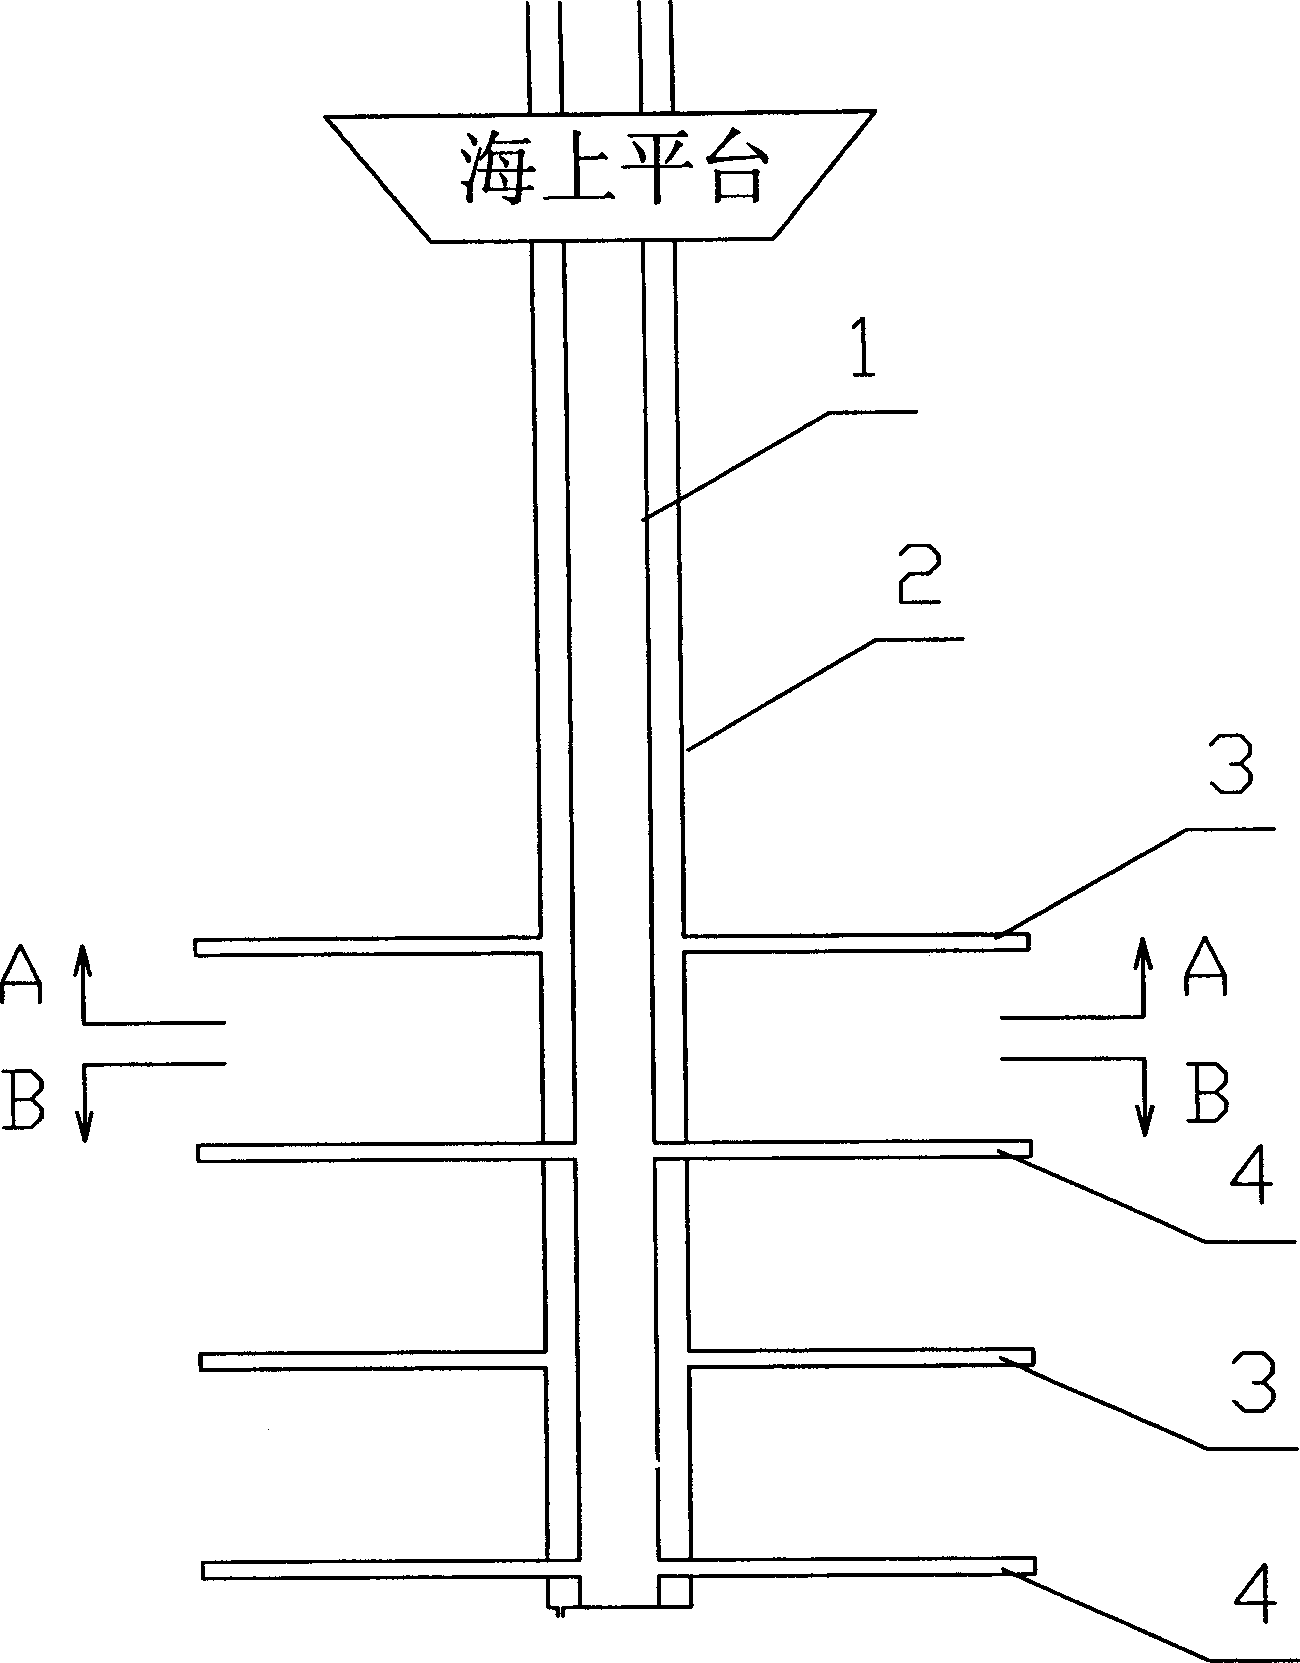 Well pattern arrangement method for underground decomposing and extracting natural gas hydrate